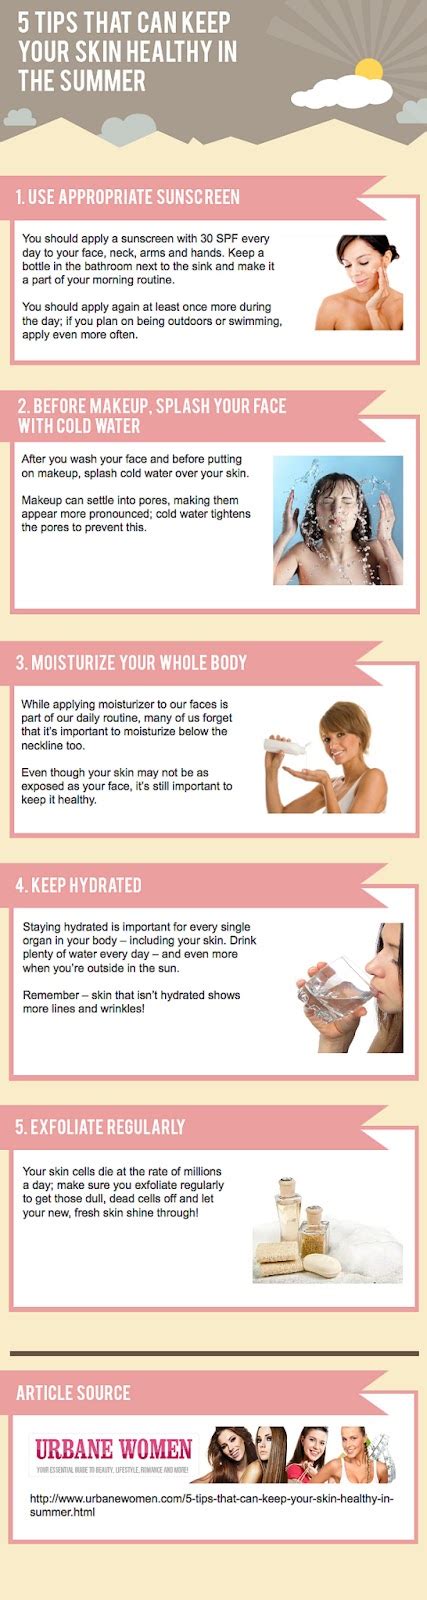 Health And Nutrition Tips Keep Your Skin Healthy In The Summer